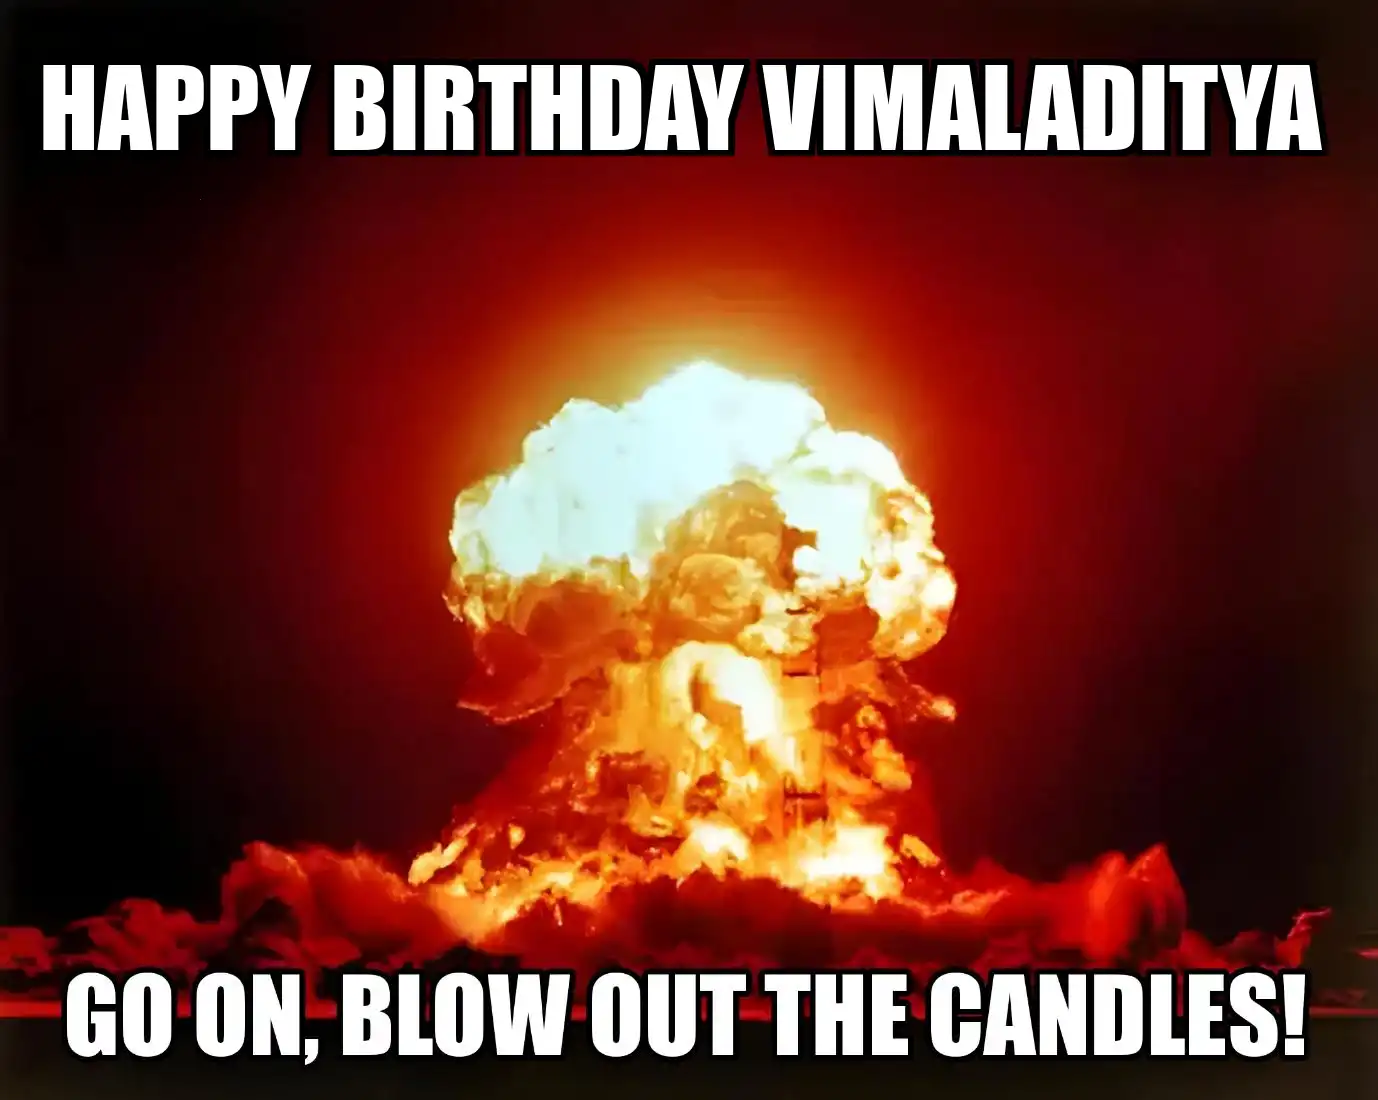 Happy Birthday Vimaladitya Go On Blow Out The Candles Meme